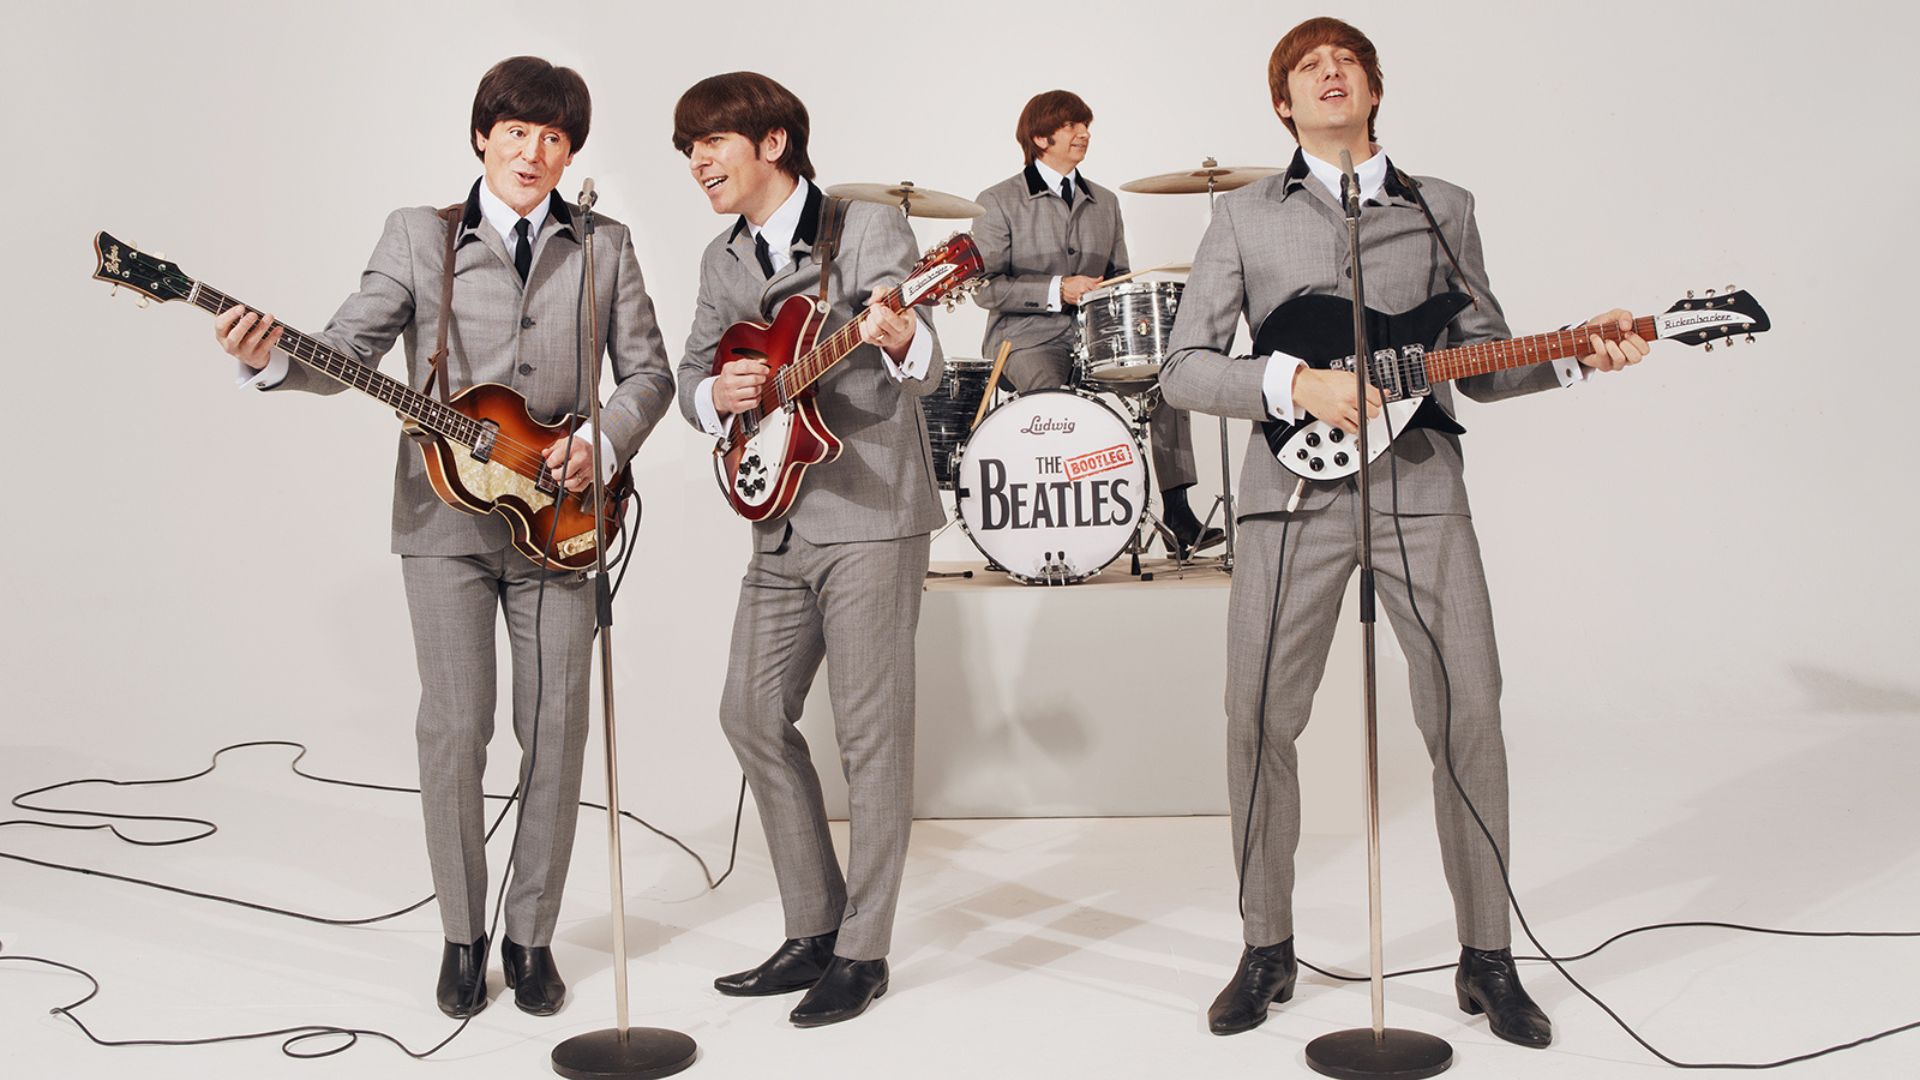 Four men perform as the Beatles with grey suits and bowl cuts. 